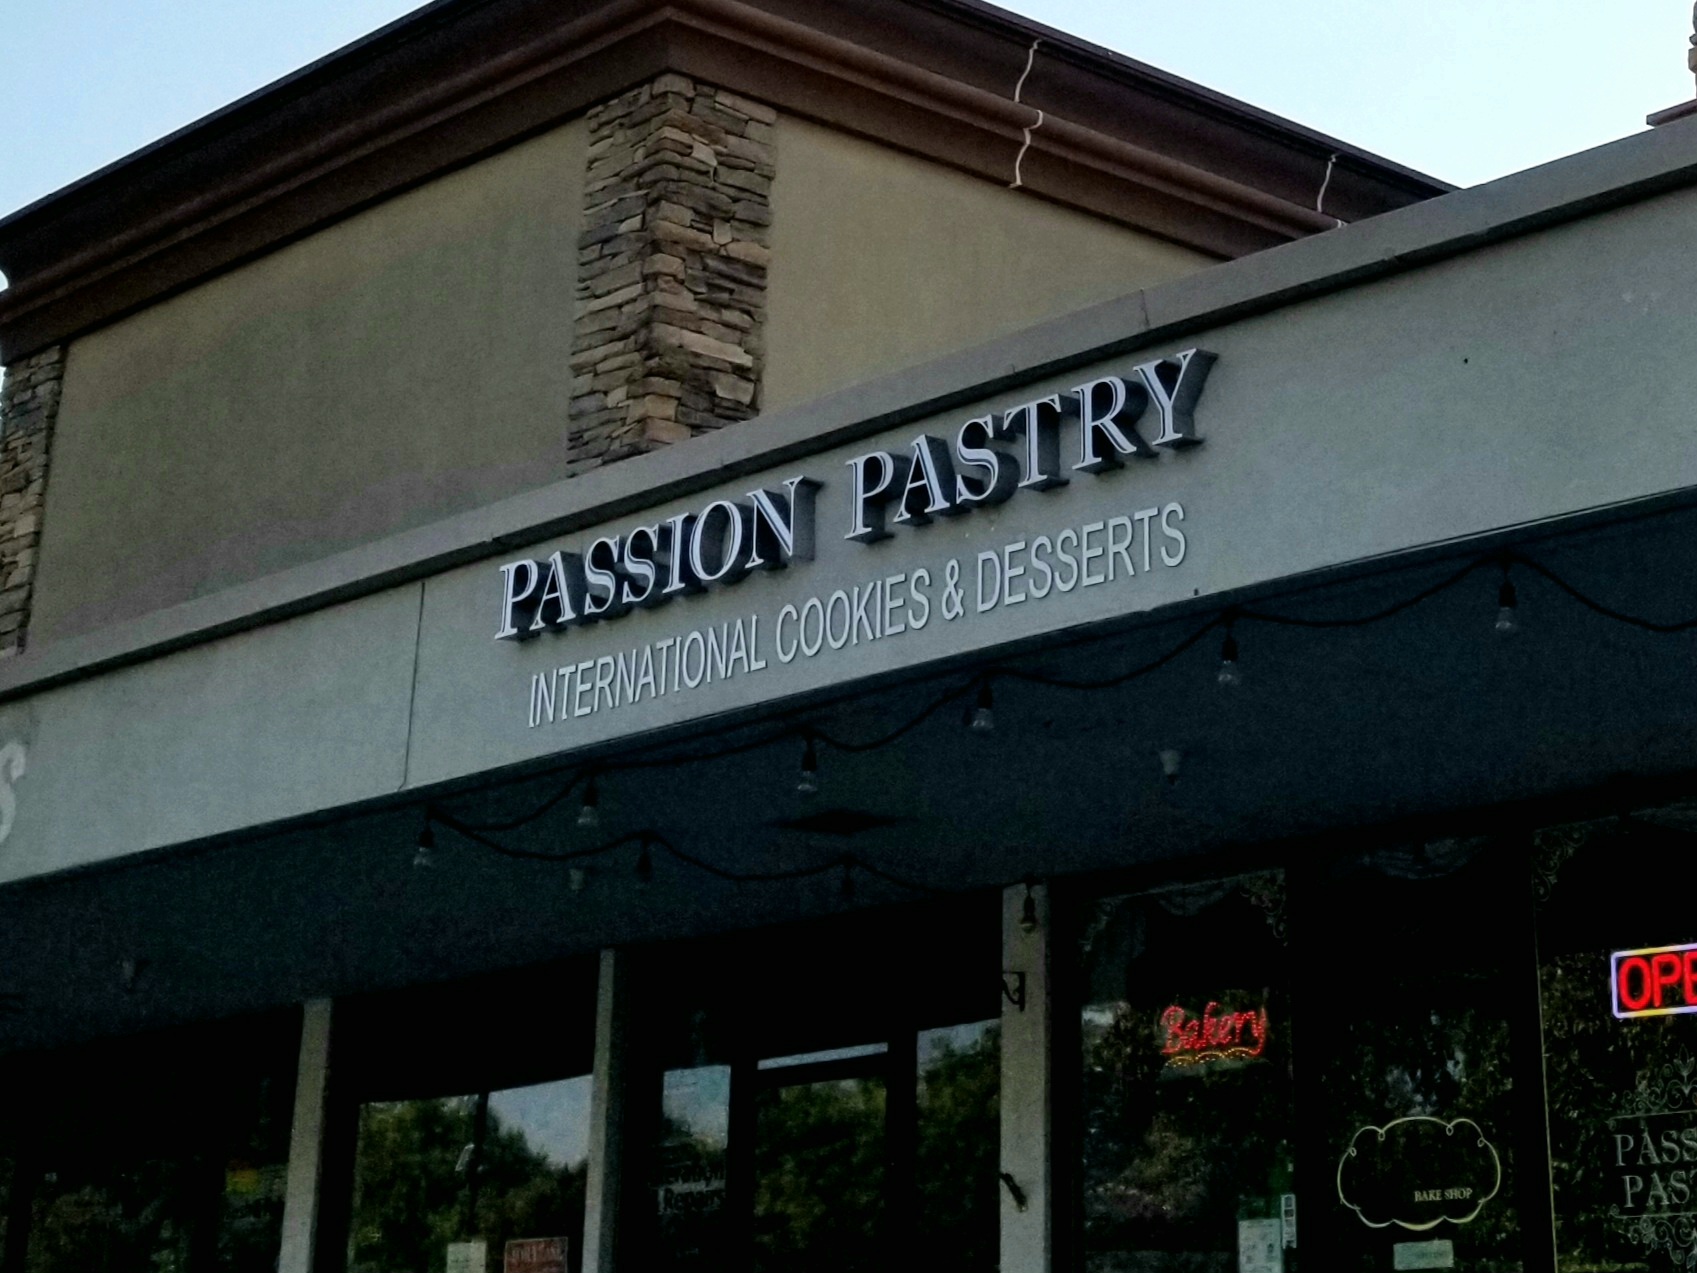 Passion pastry